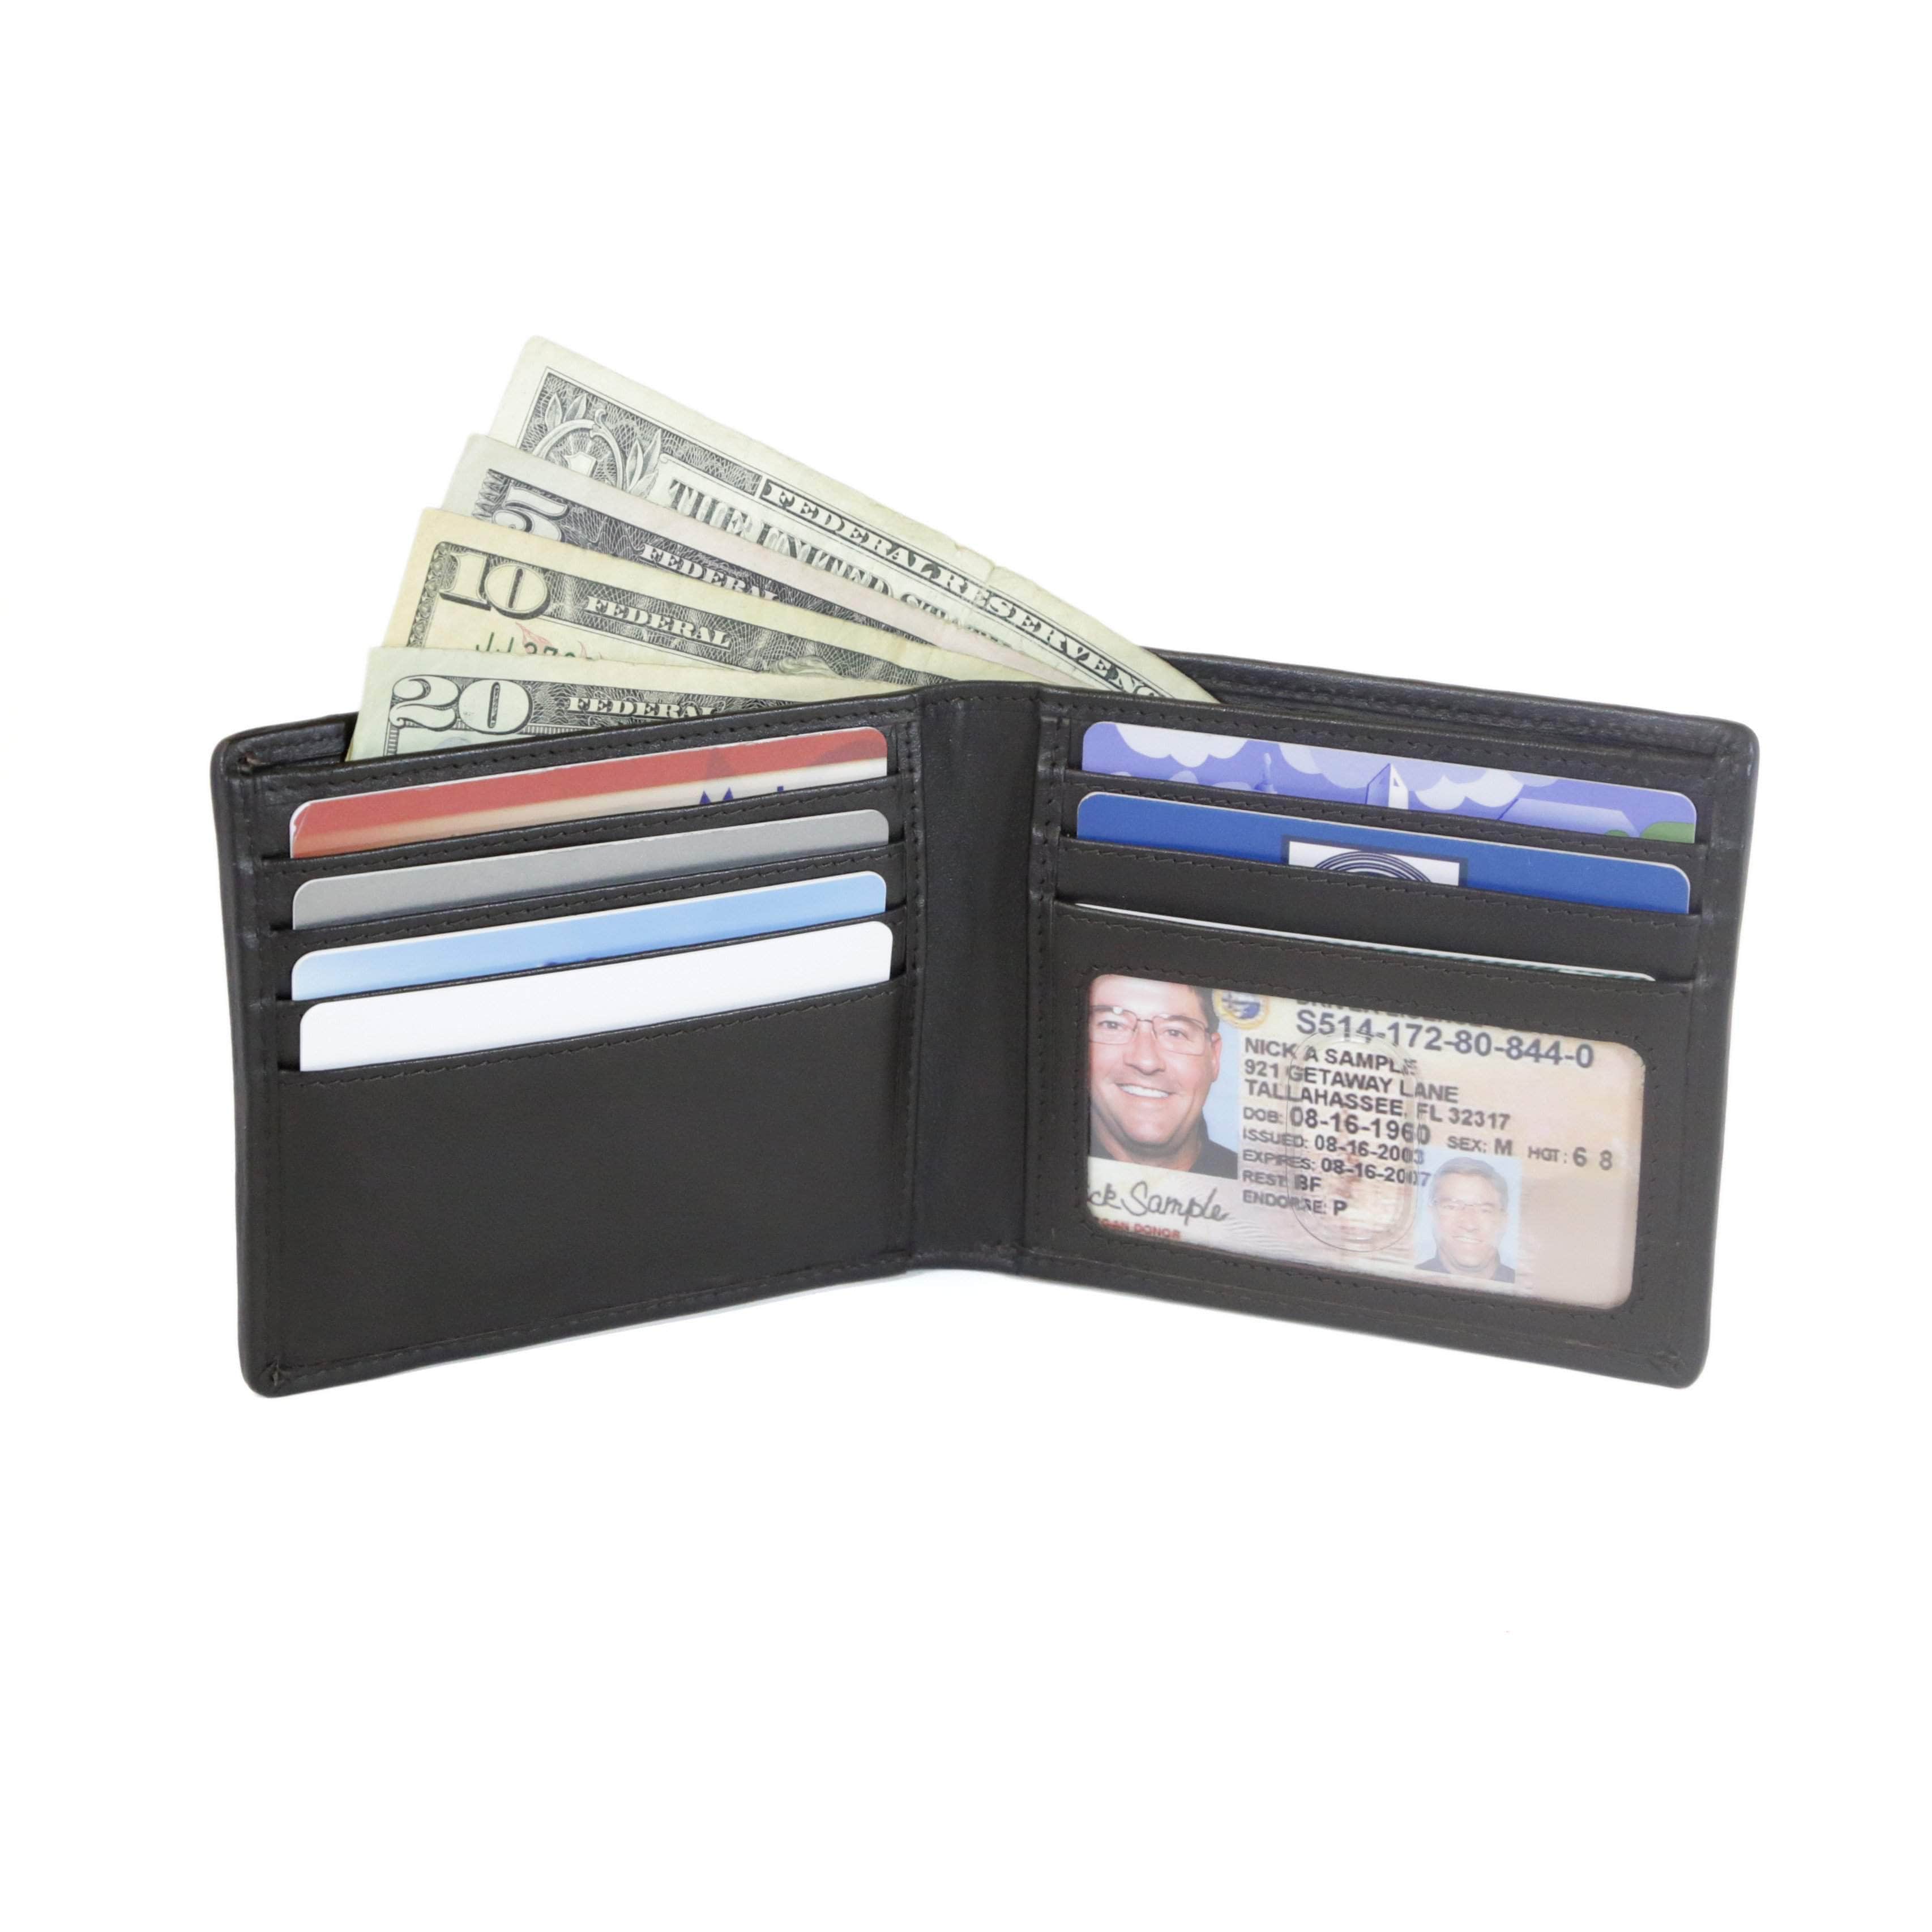 ID Stronghold  Men's Leather RFID Wallet 10 slot Bifold